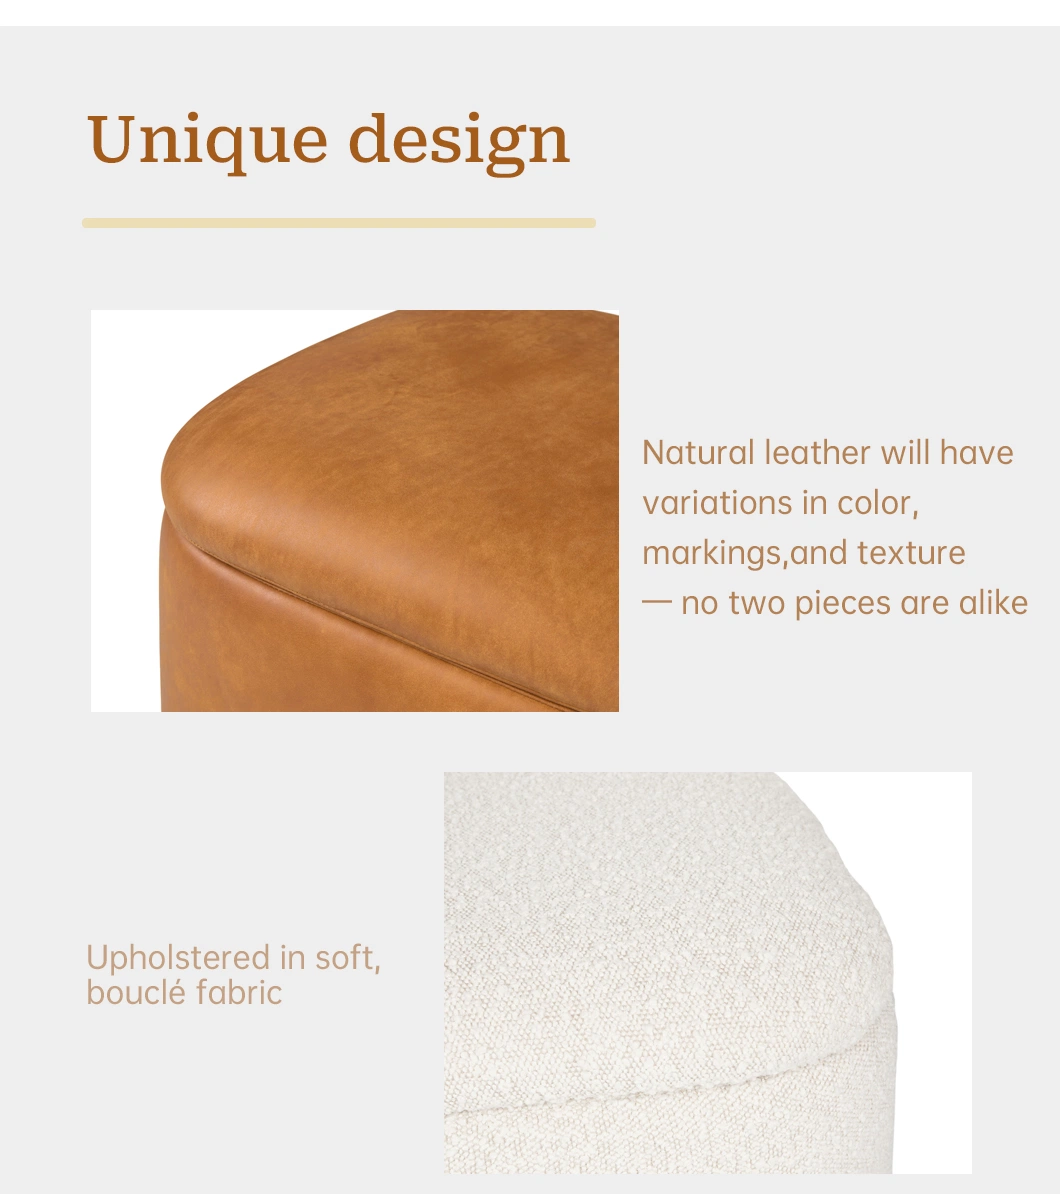 Hot Sale Storage Ottoman Living Room Furniture Round Leather Stool